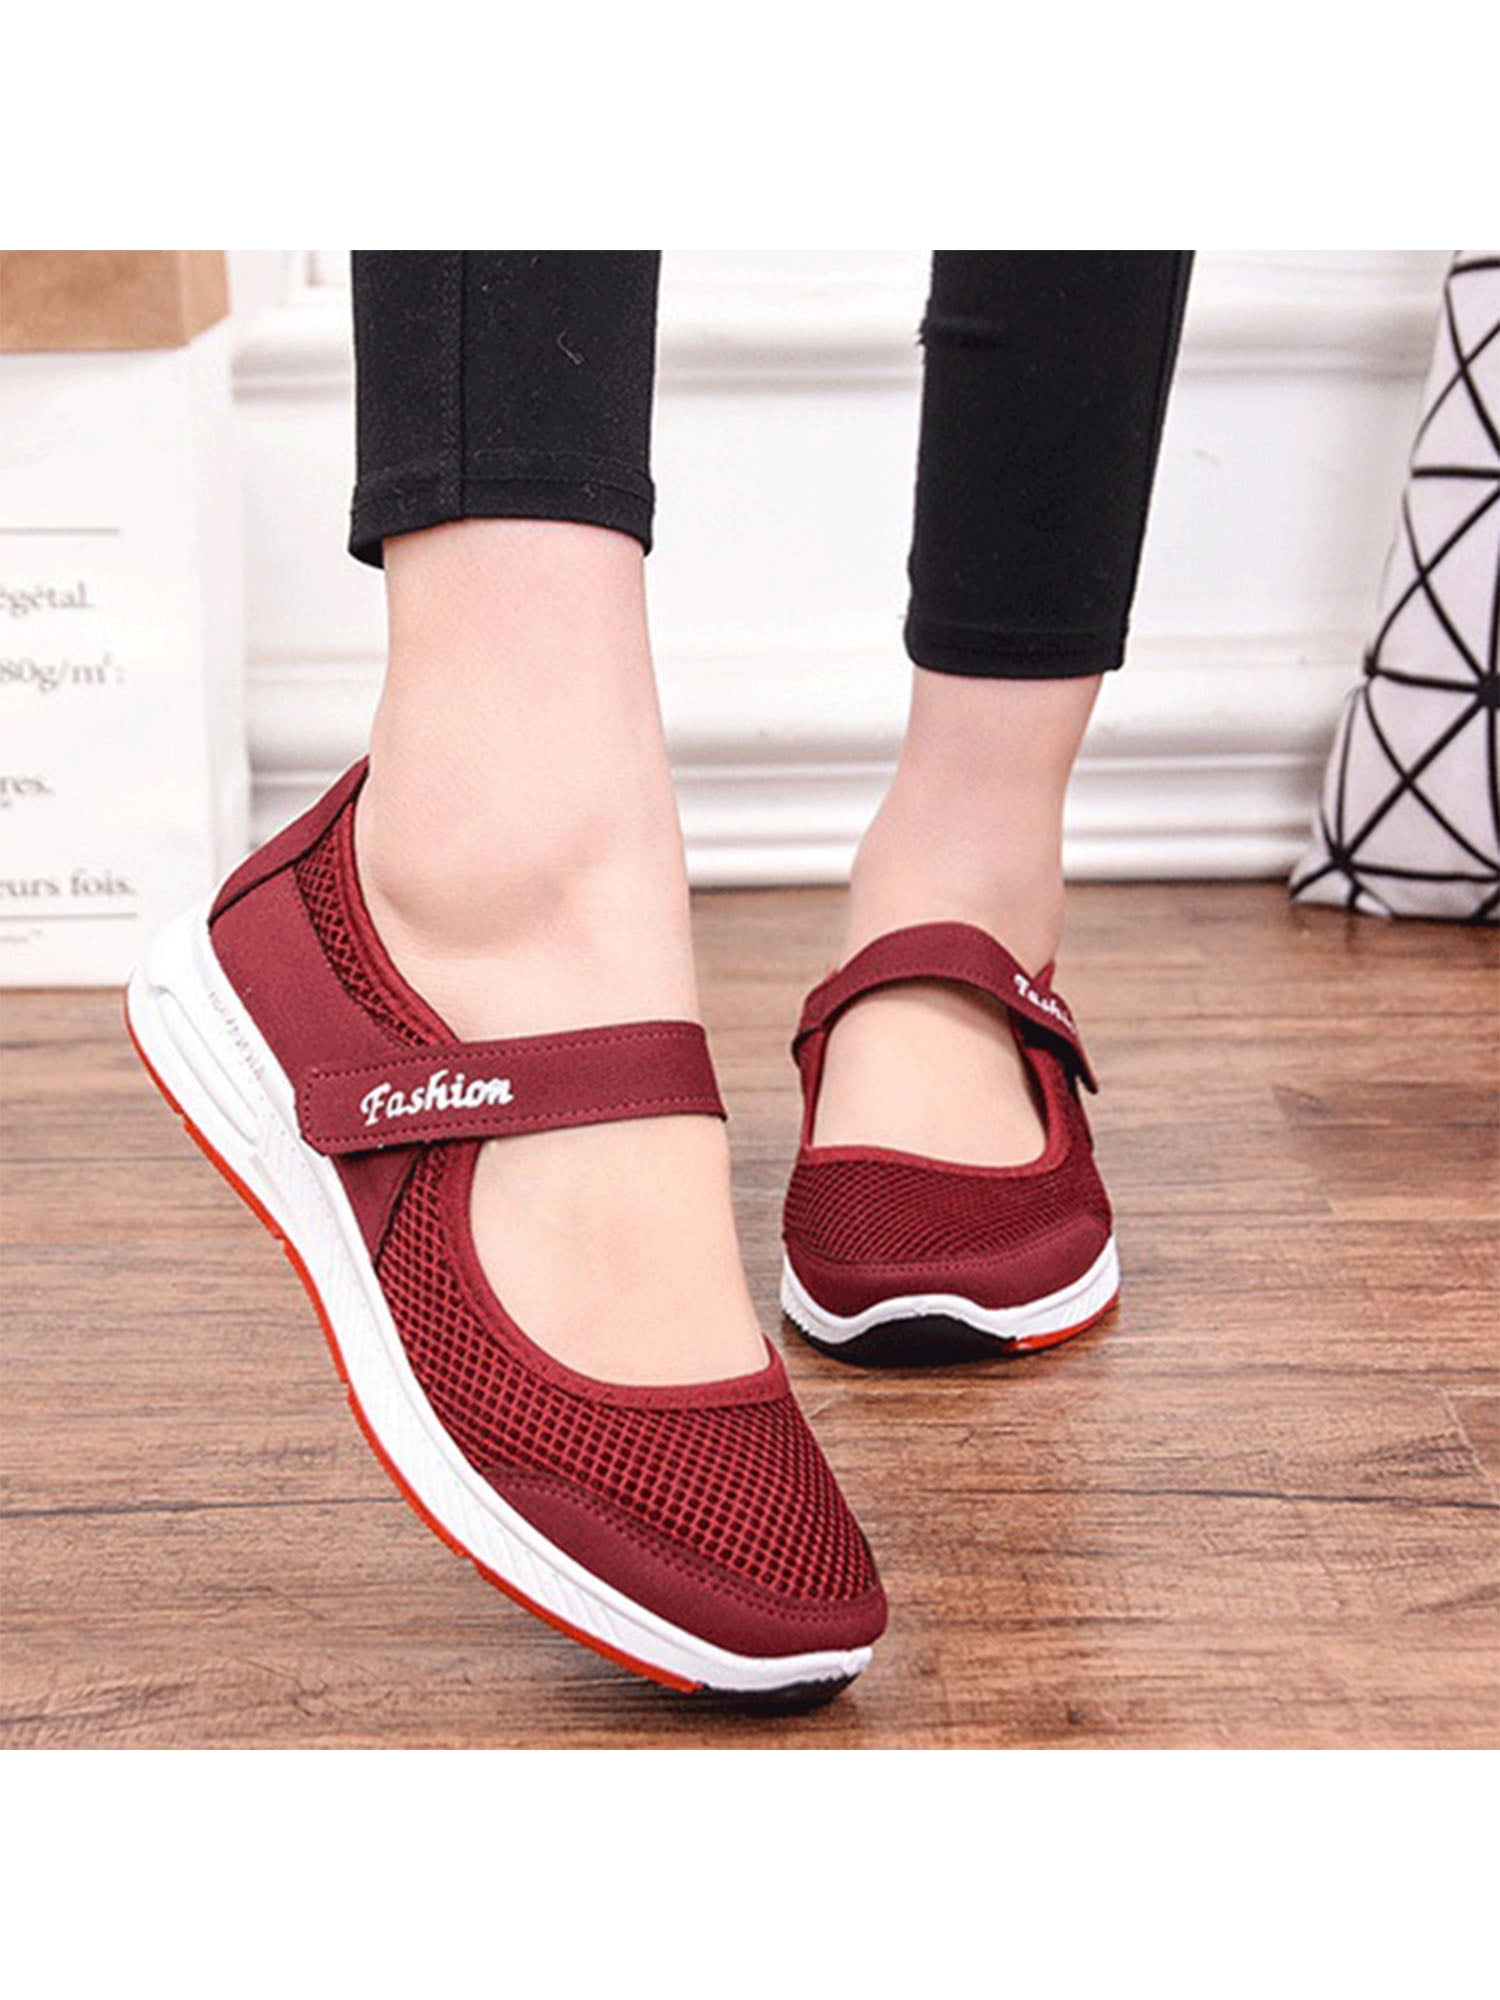 Women Summer Sport Slip On Elastic Flat Shoes Breathable Casual Sandals Size LG 